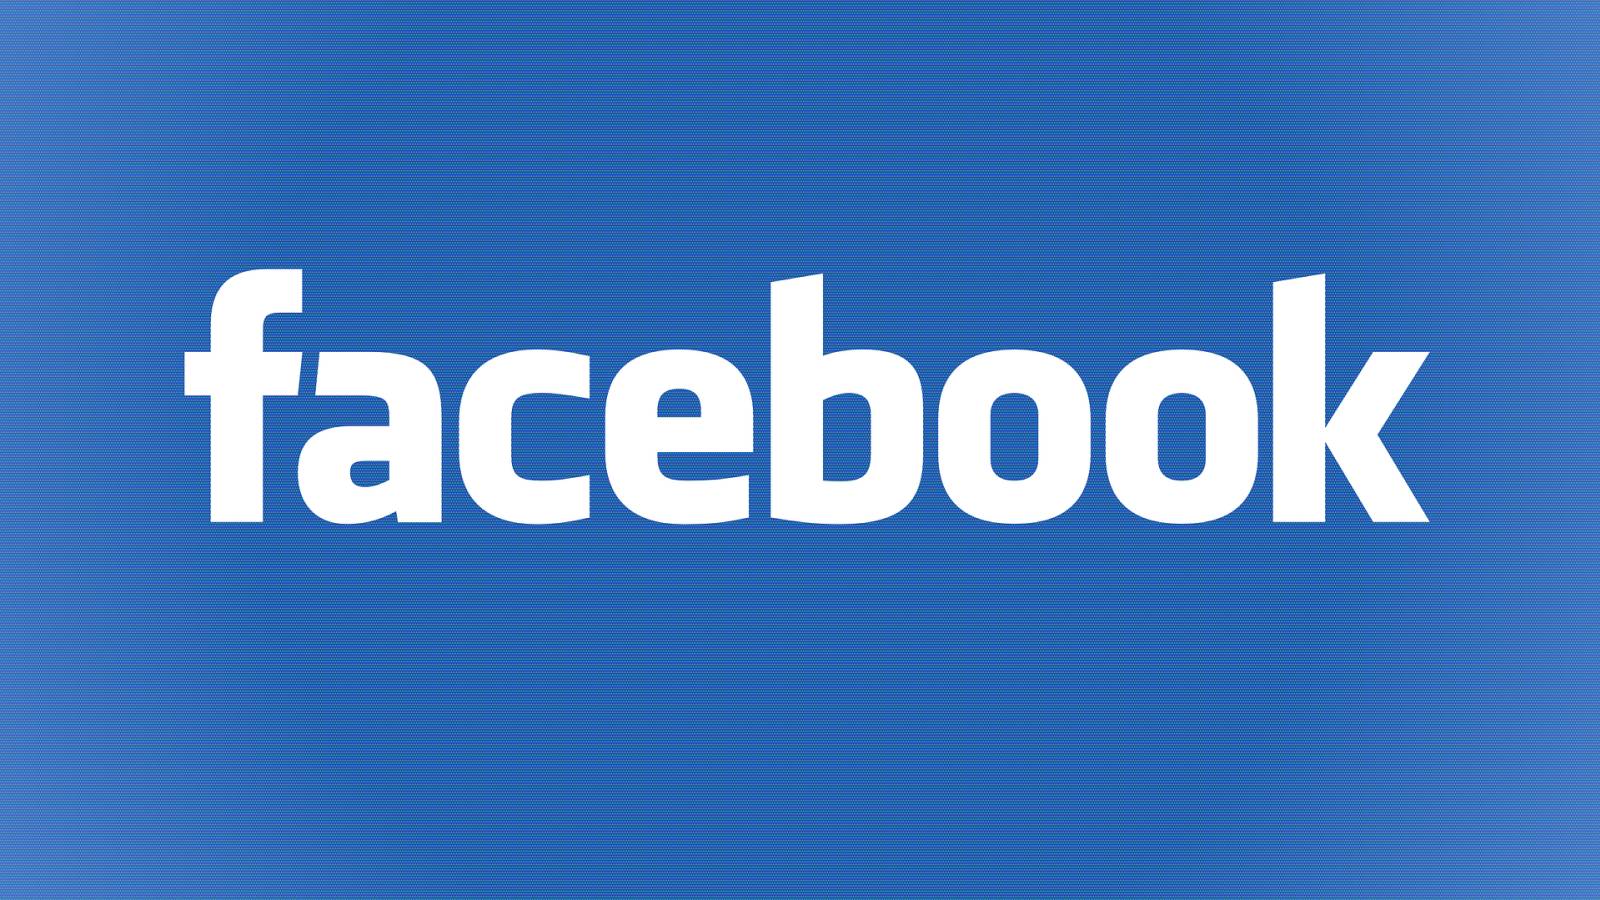 New Update for the Facebook Application Available on Phones, Tablets